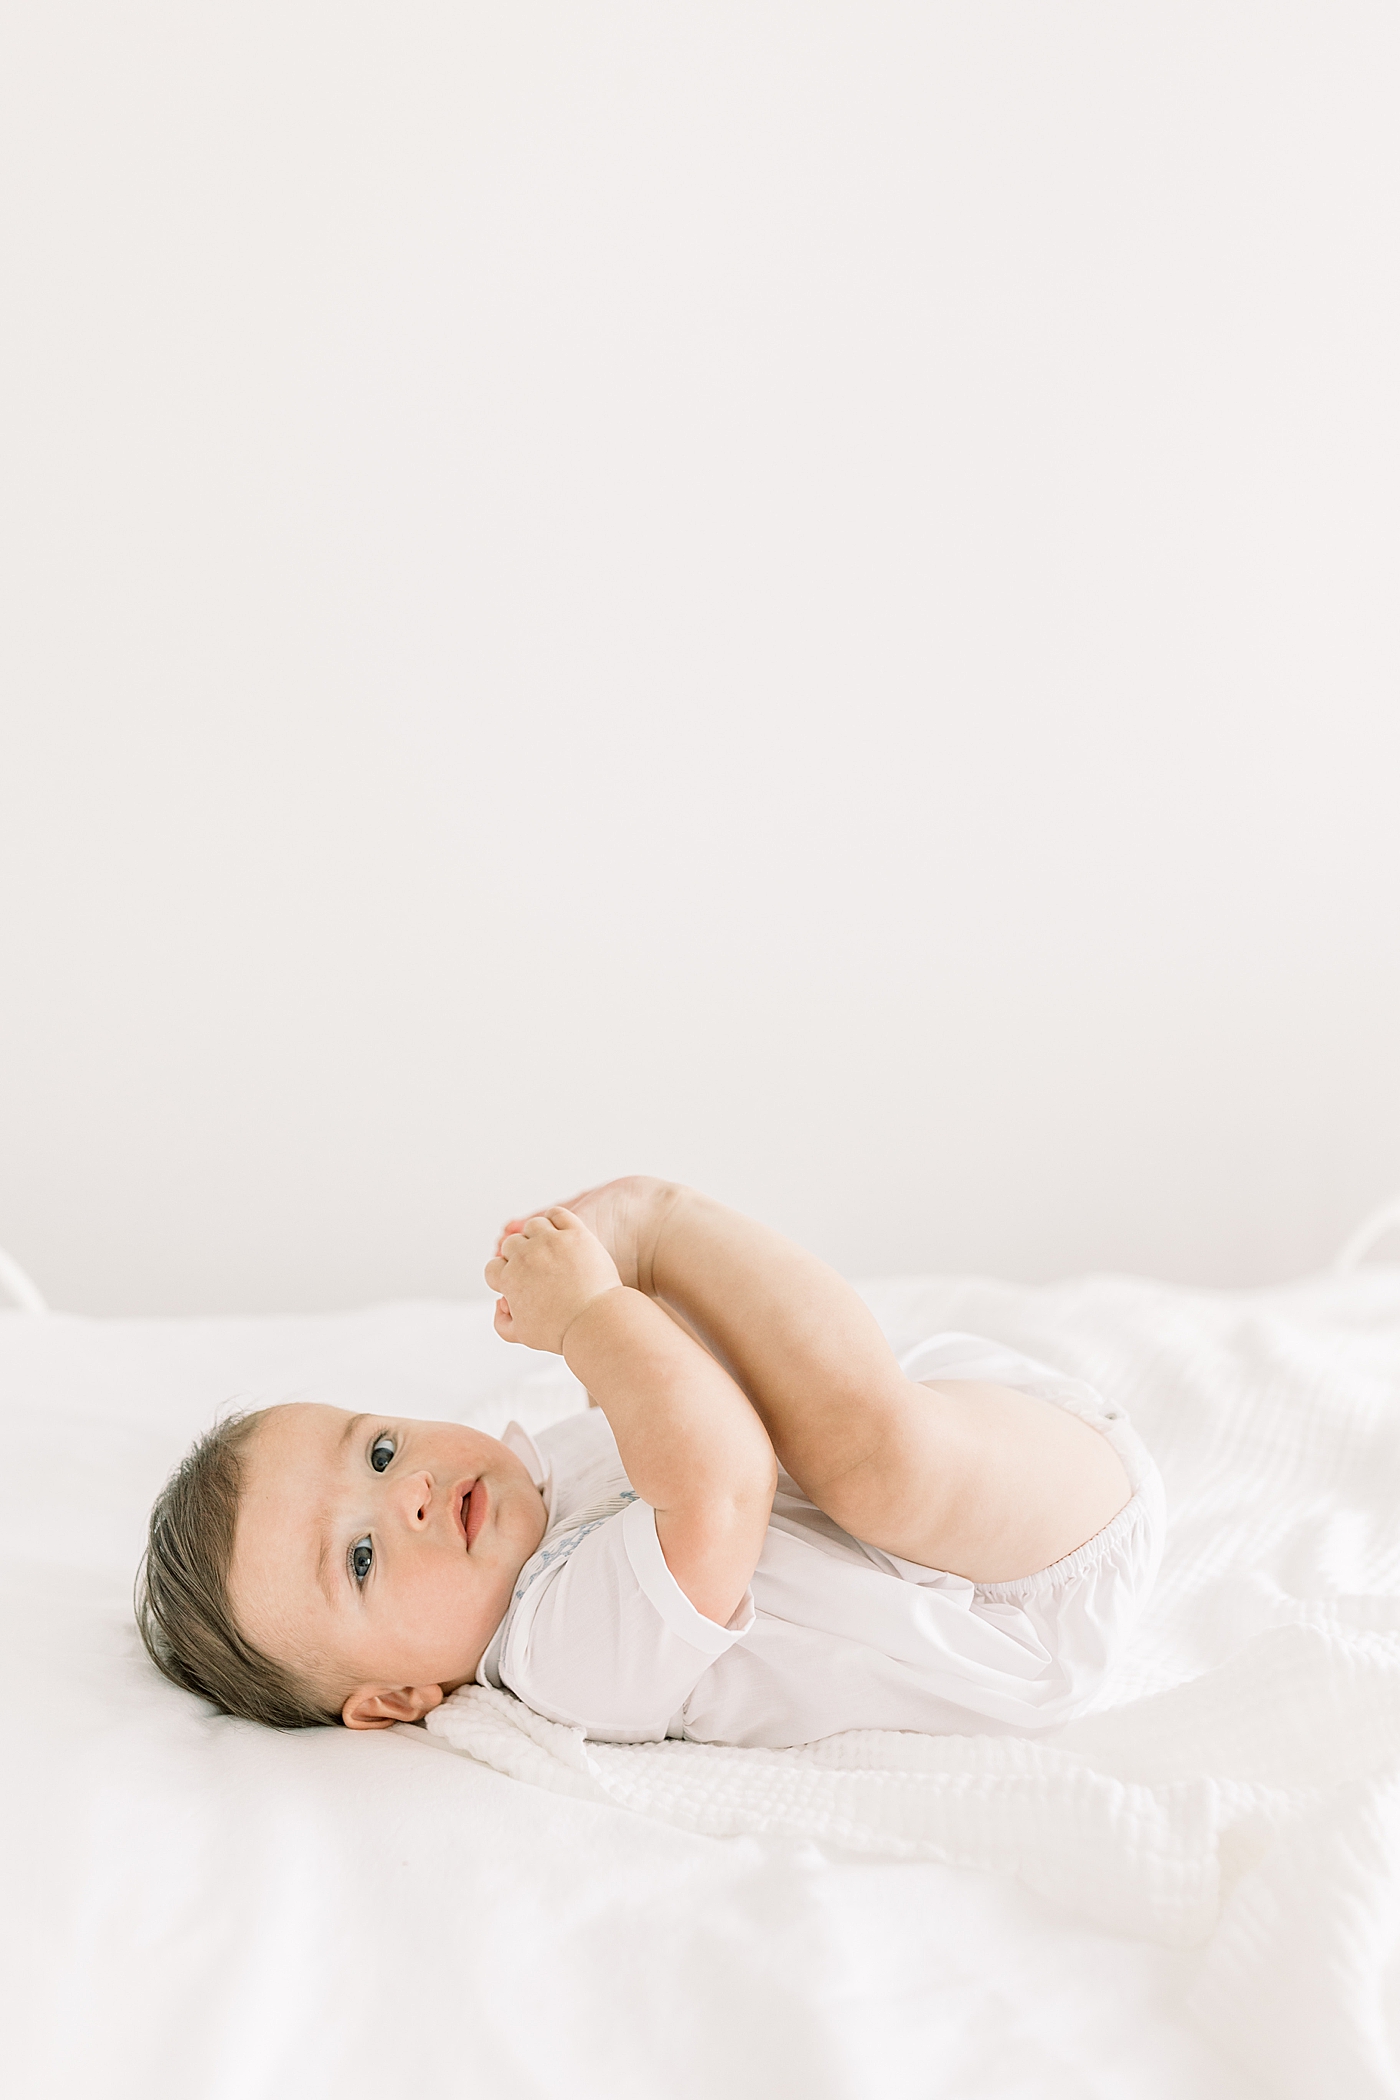 Baby smiling and laying on back, looking at camera in a softly lit room | Images by Caitlyn Motycka